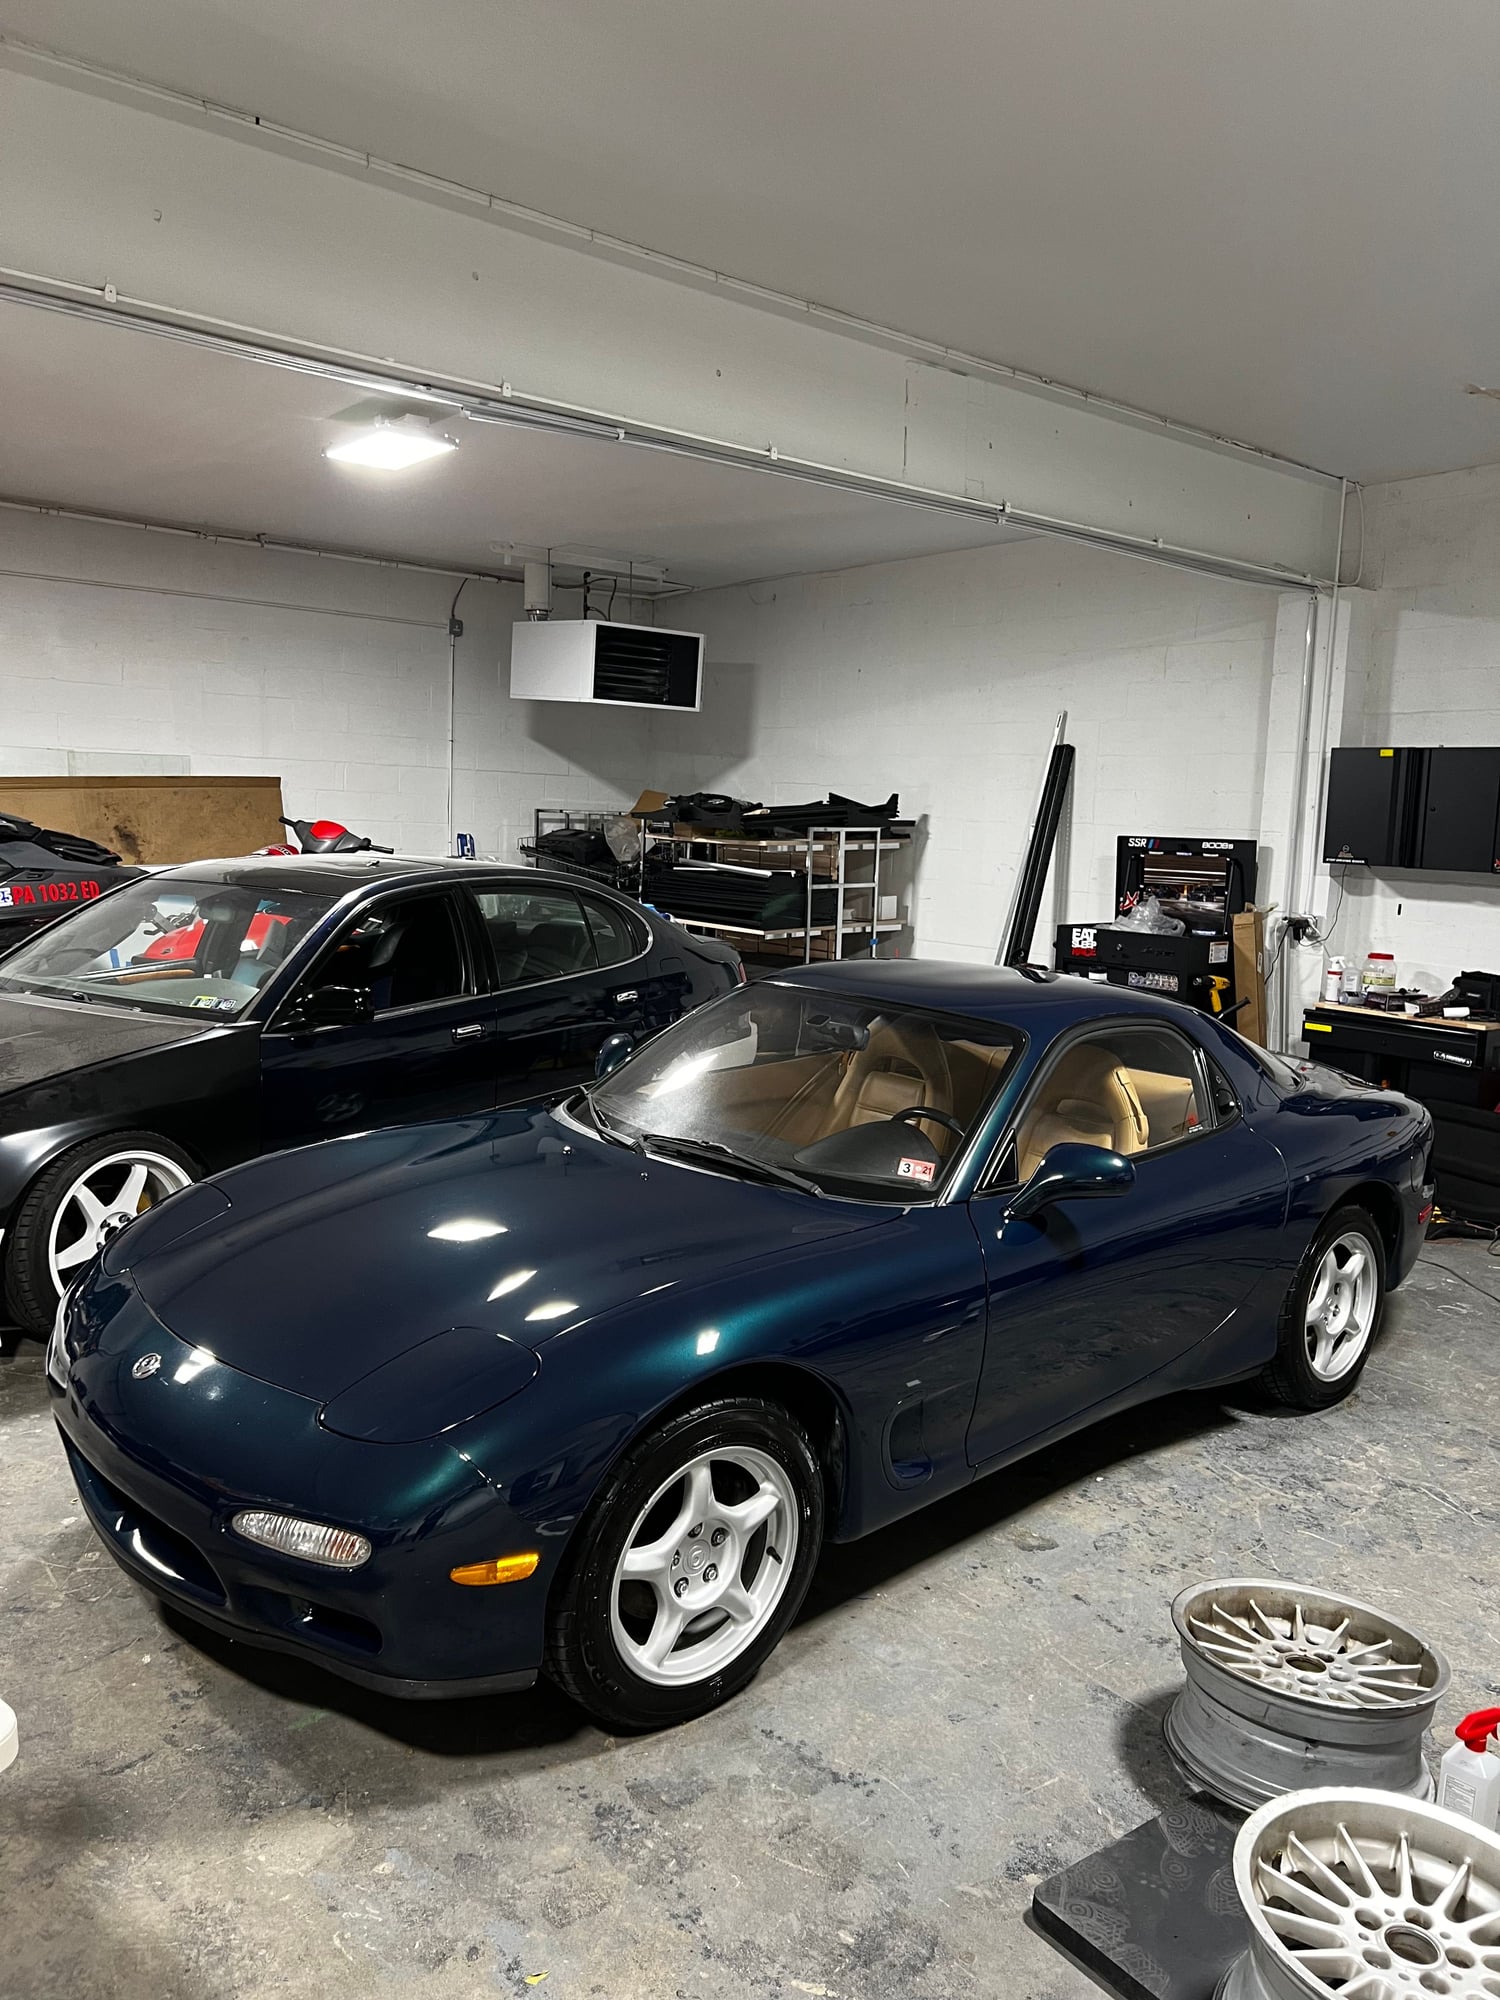 1993 Mazda RX-7 - *** Mazda Rx-7 - Single Owner - Hardtop - All Original *** - Used - VIN JM1FD3310P0207339 - 77,700 Miles - Other - 2WD - Manual - Coupe - Blue - Allentown, PA 18031, United States